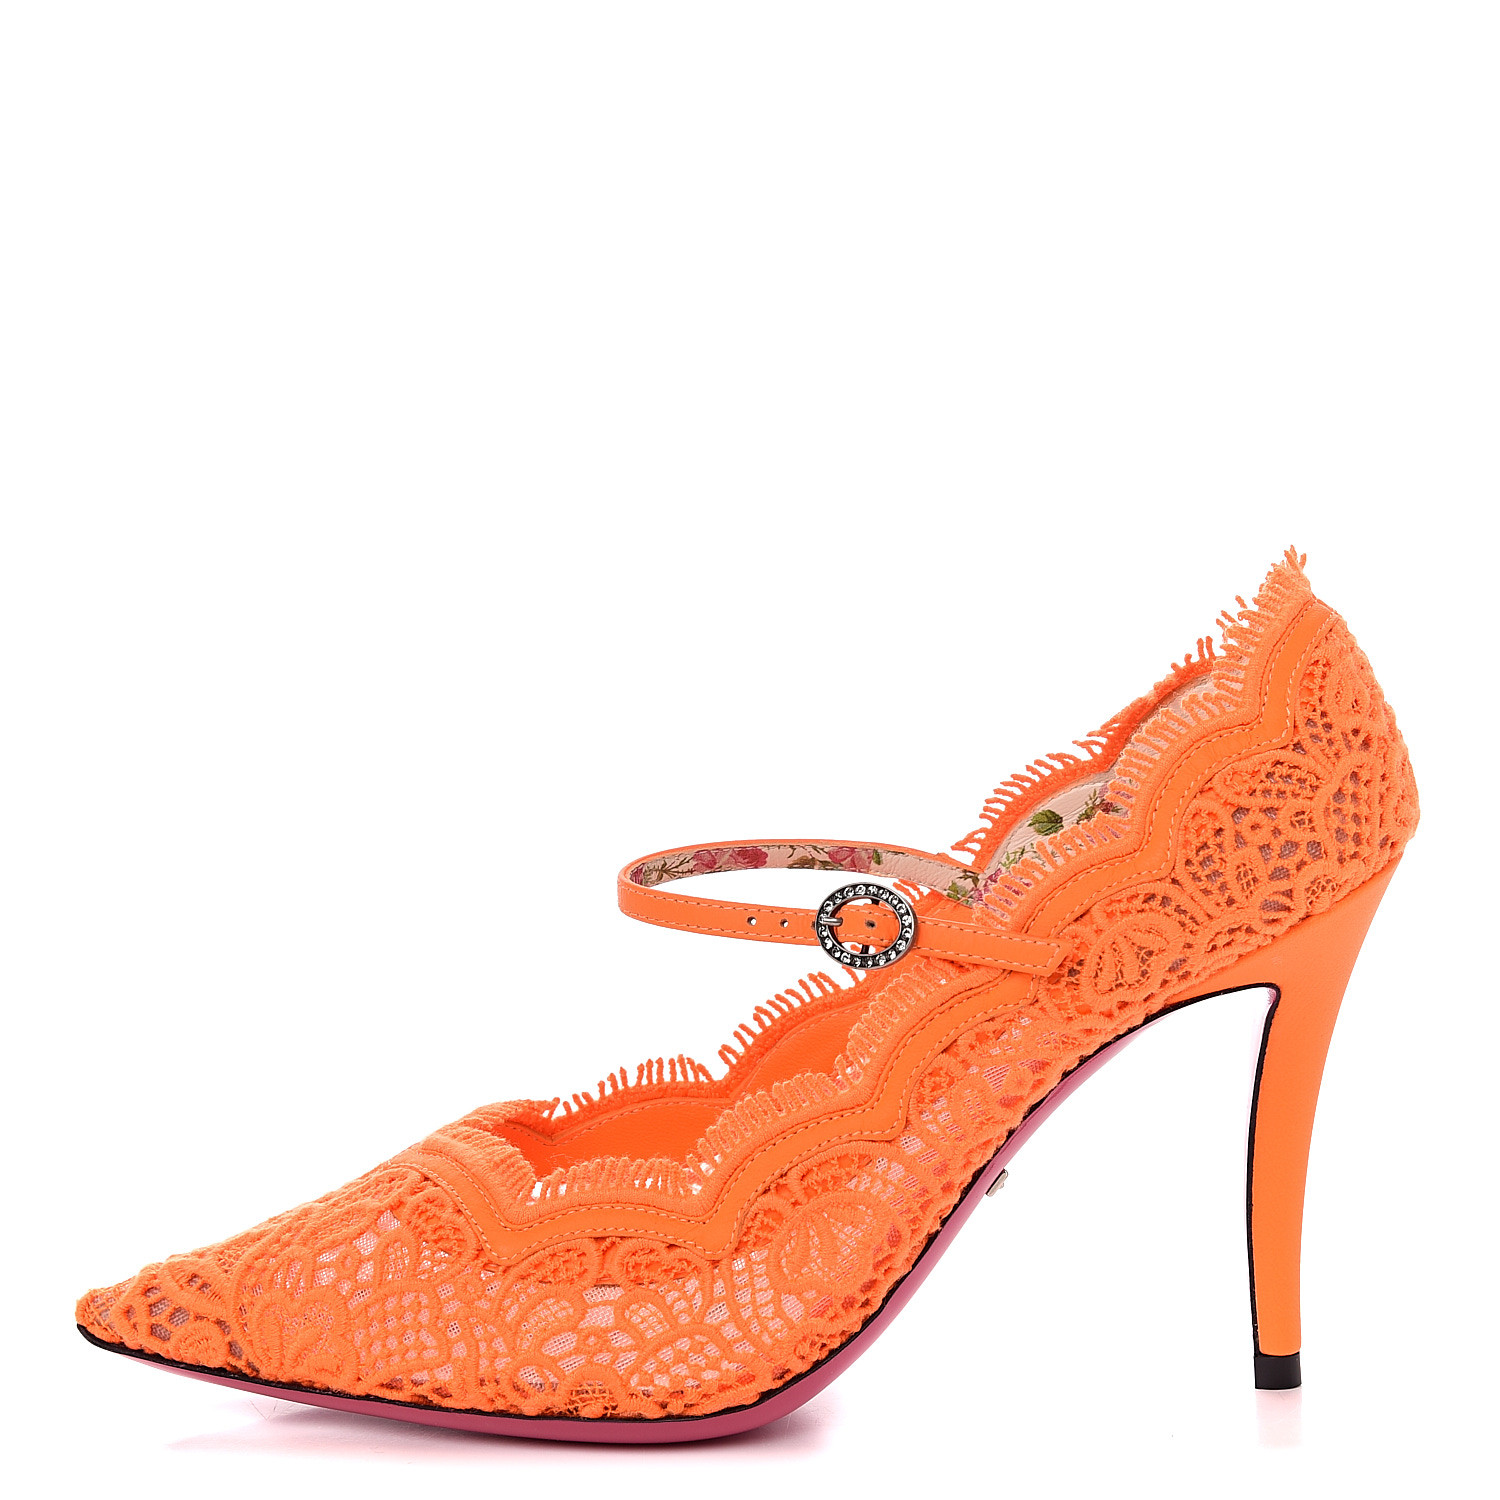 gucci virginia lace mary jane pumps